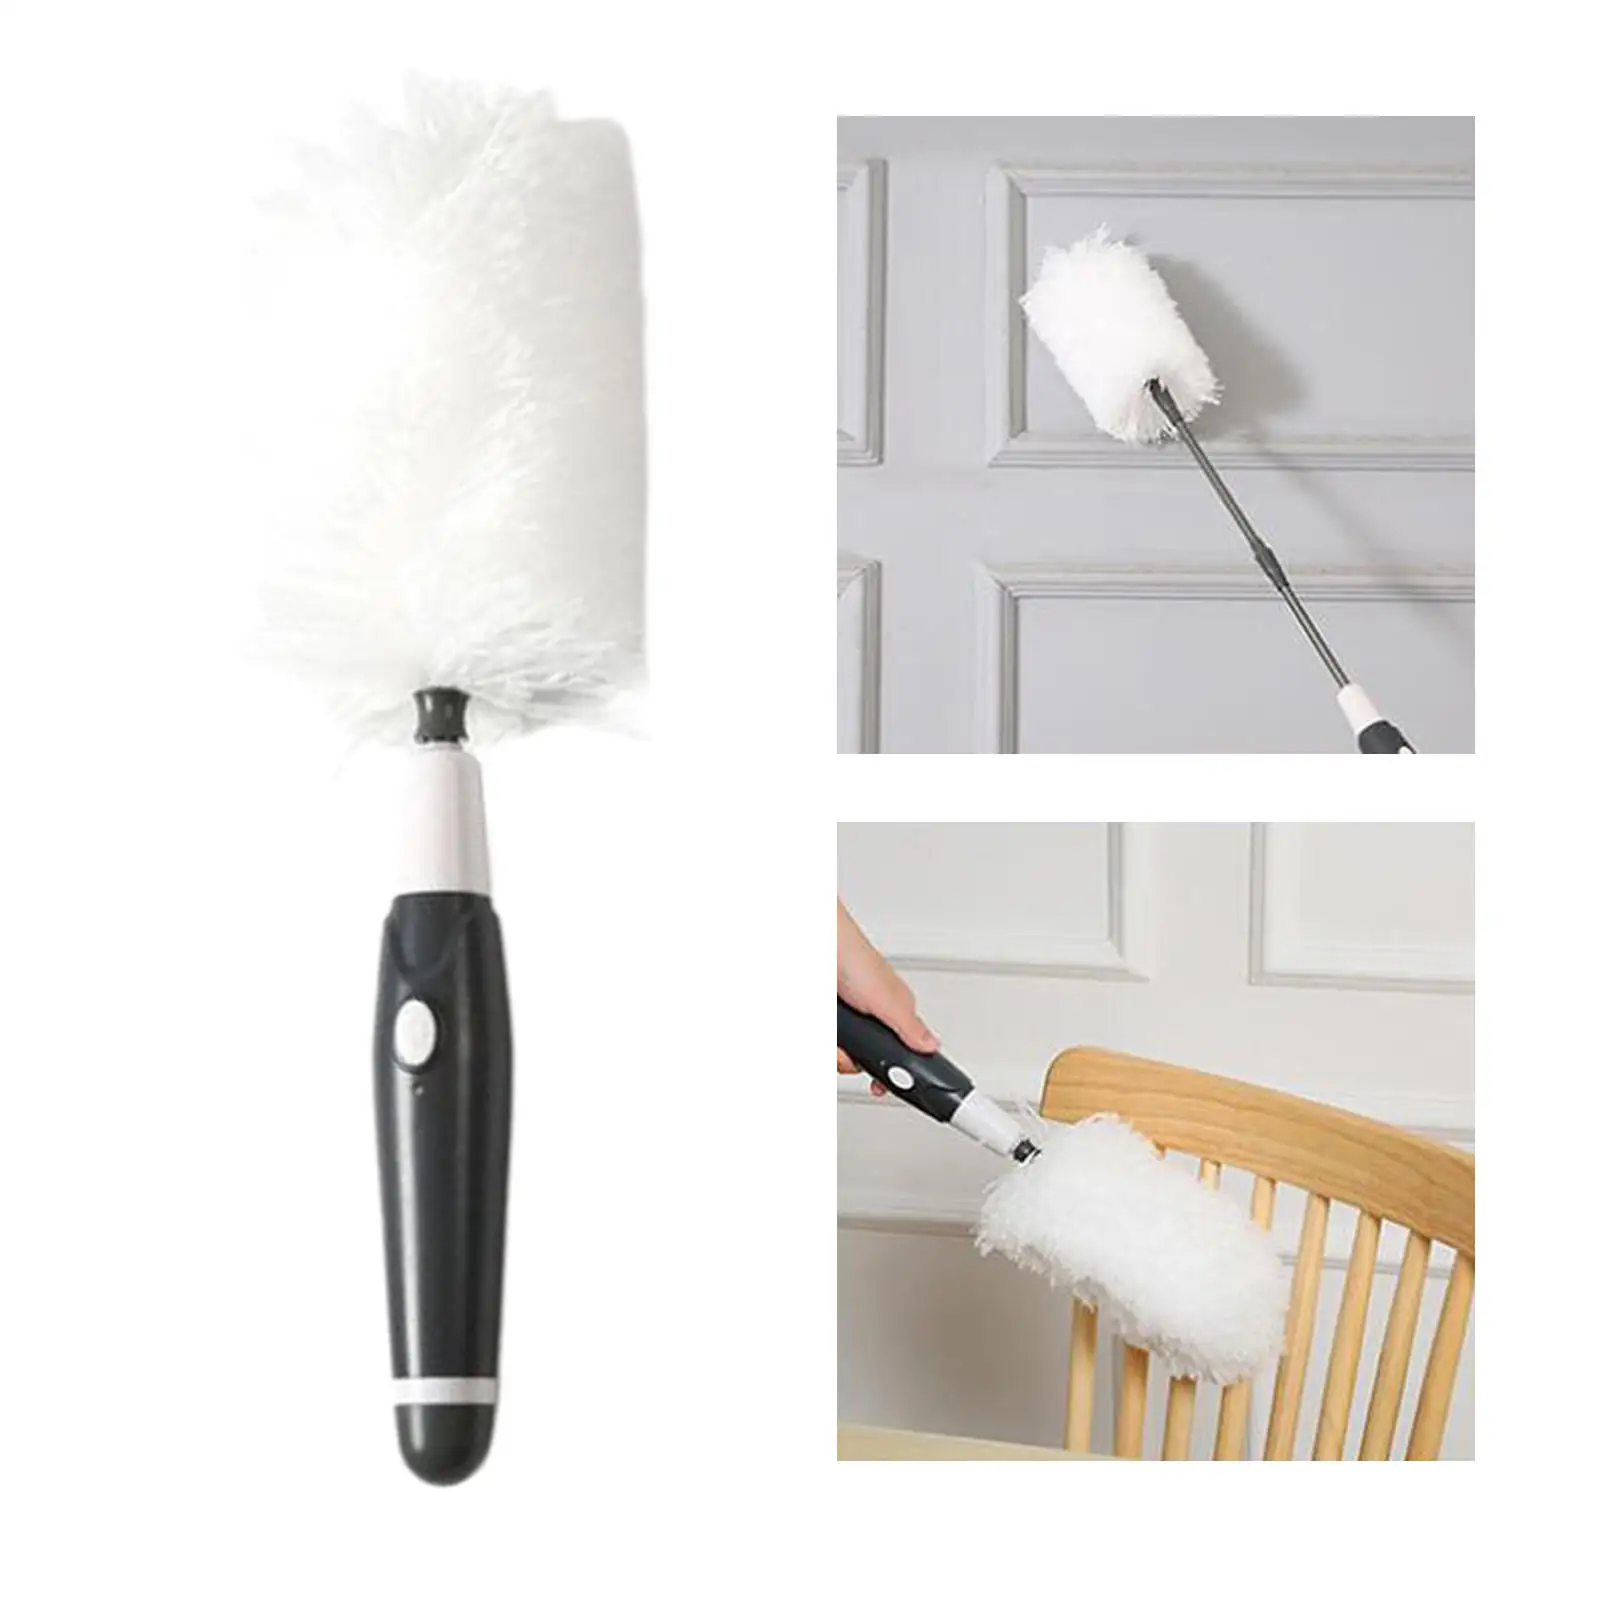 Retractable Dust Remove Brush Telescoping Extension Pole USB 12W Hand Duster Dust Collector Household Brush for Ceiling Fan Cars